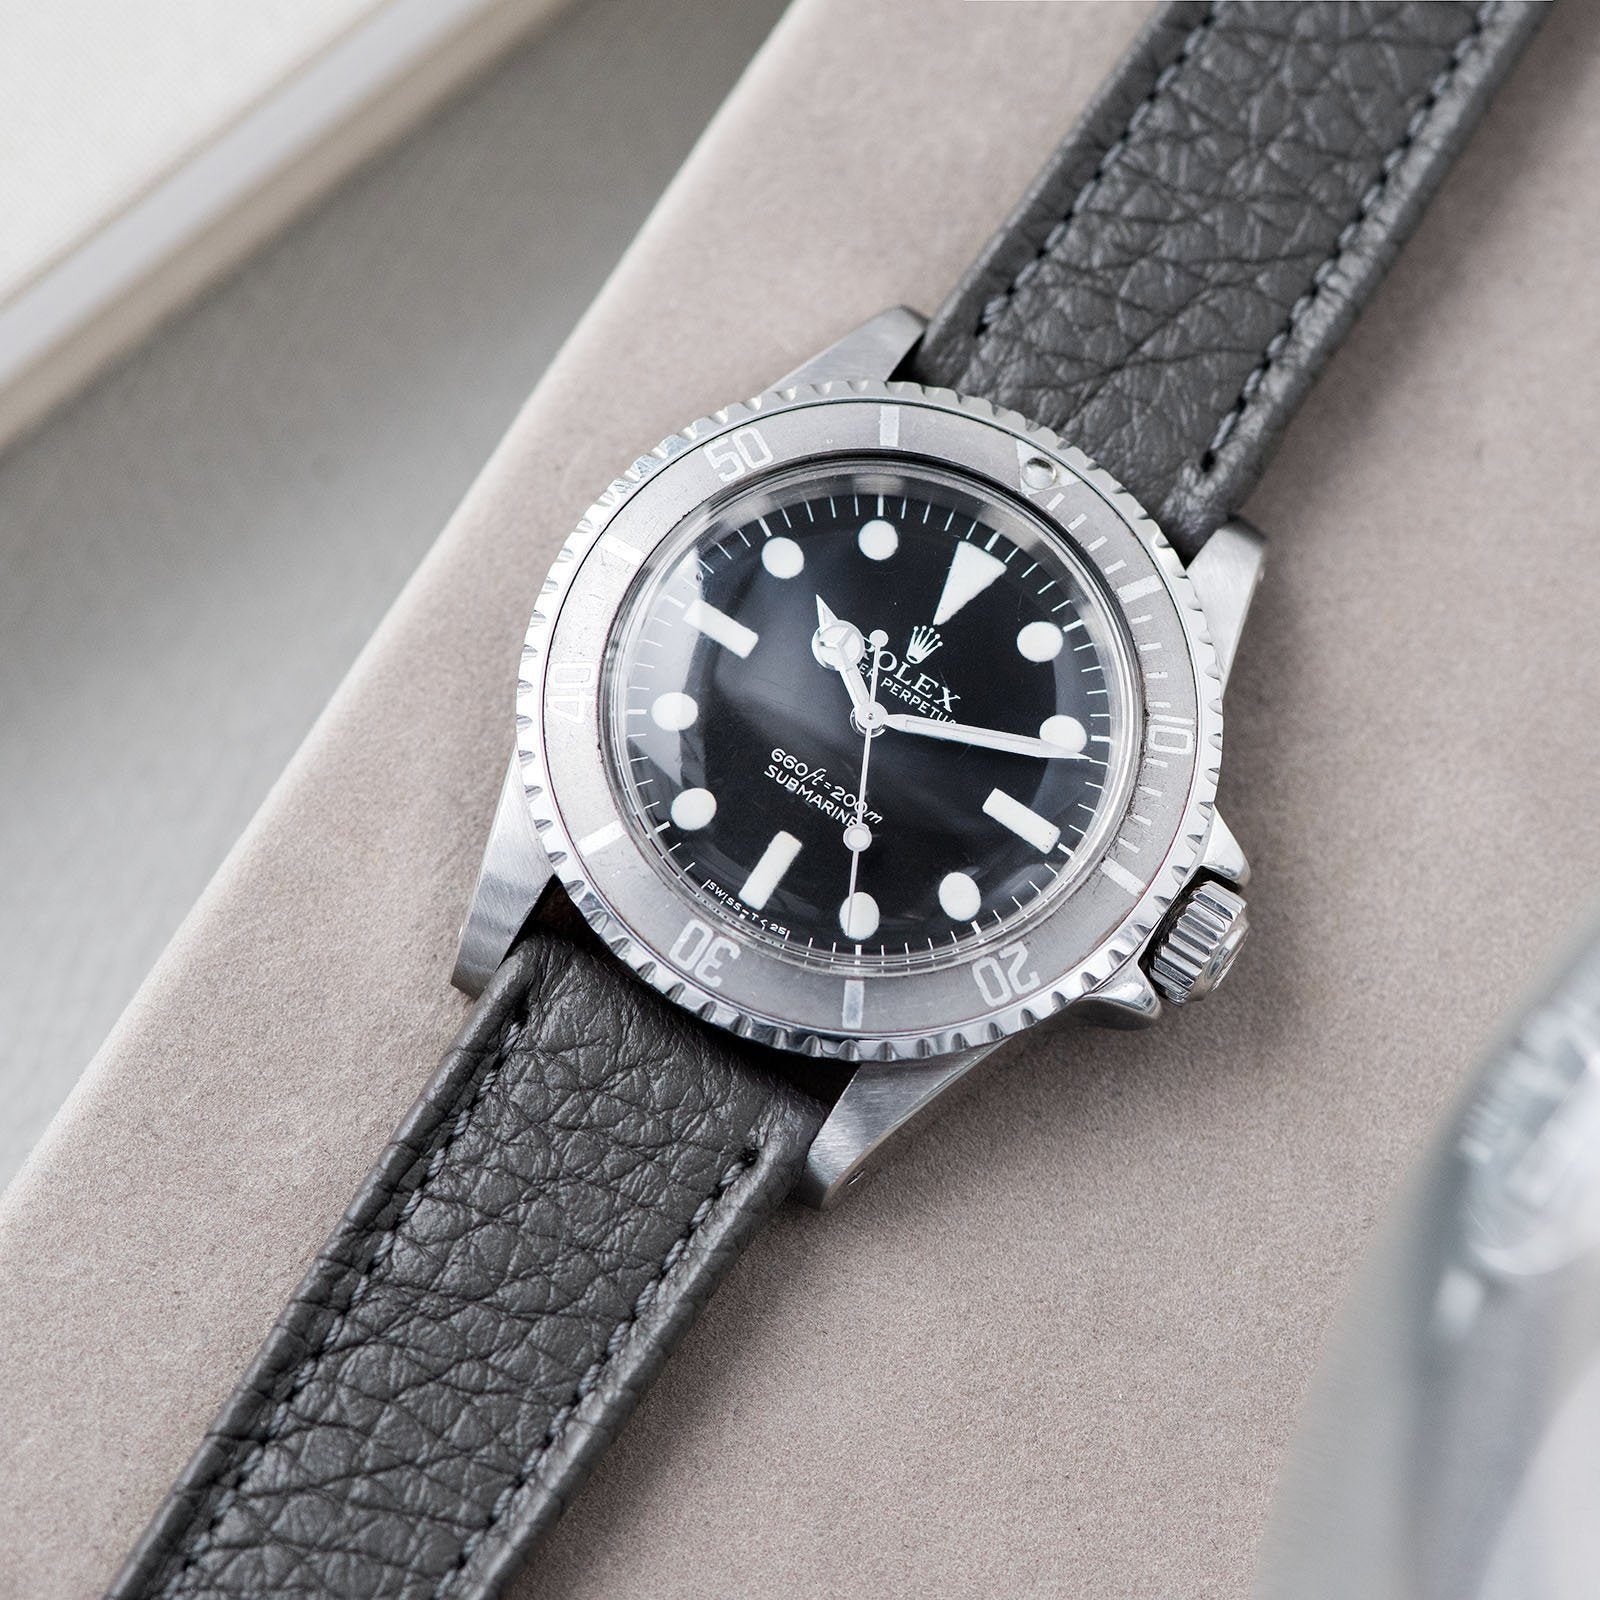 B&S Taurillon Grey Heritage Leather Watch Strap on a Rolex 5513 Submariner 